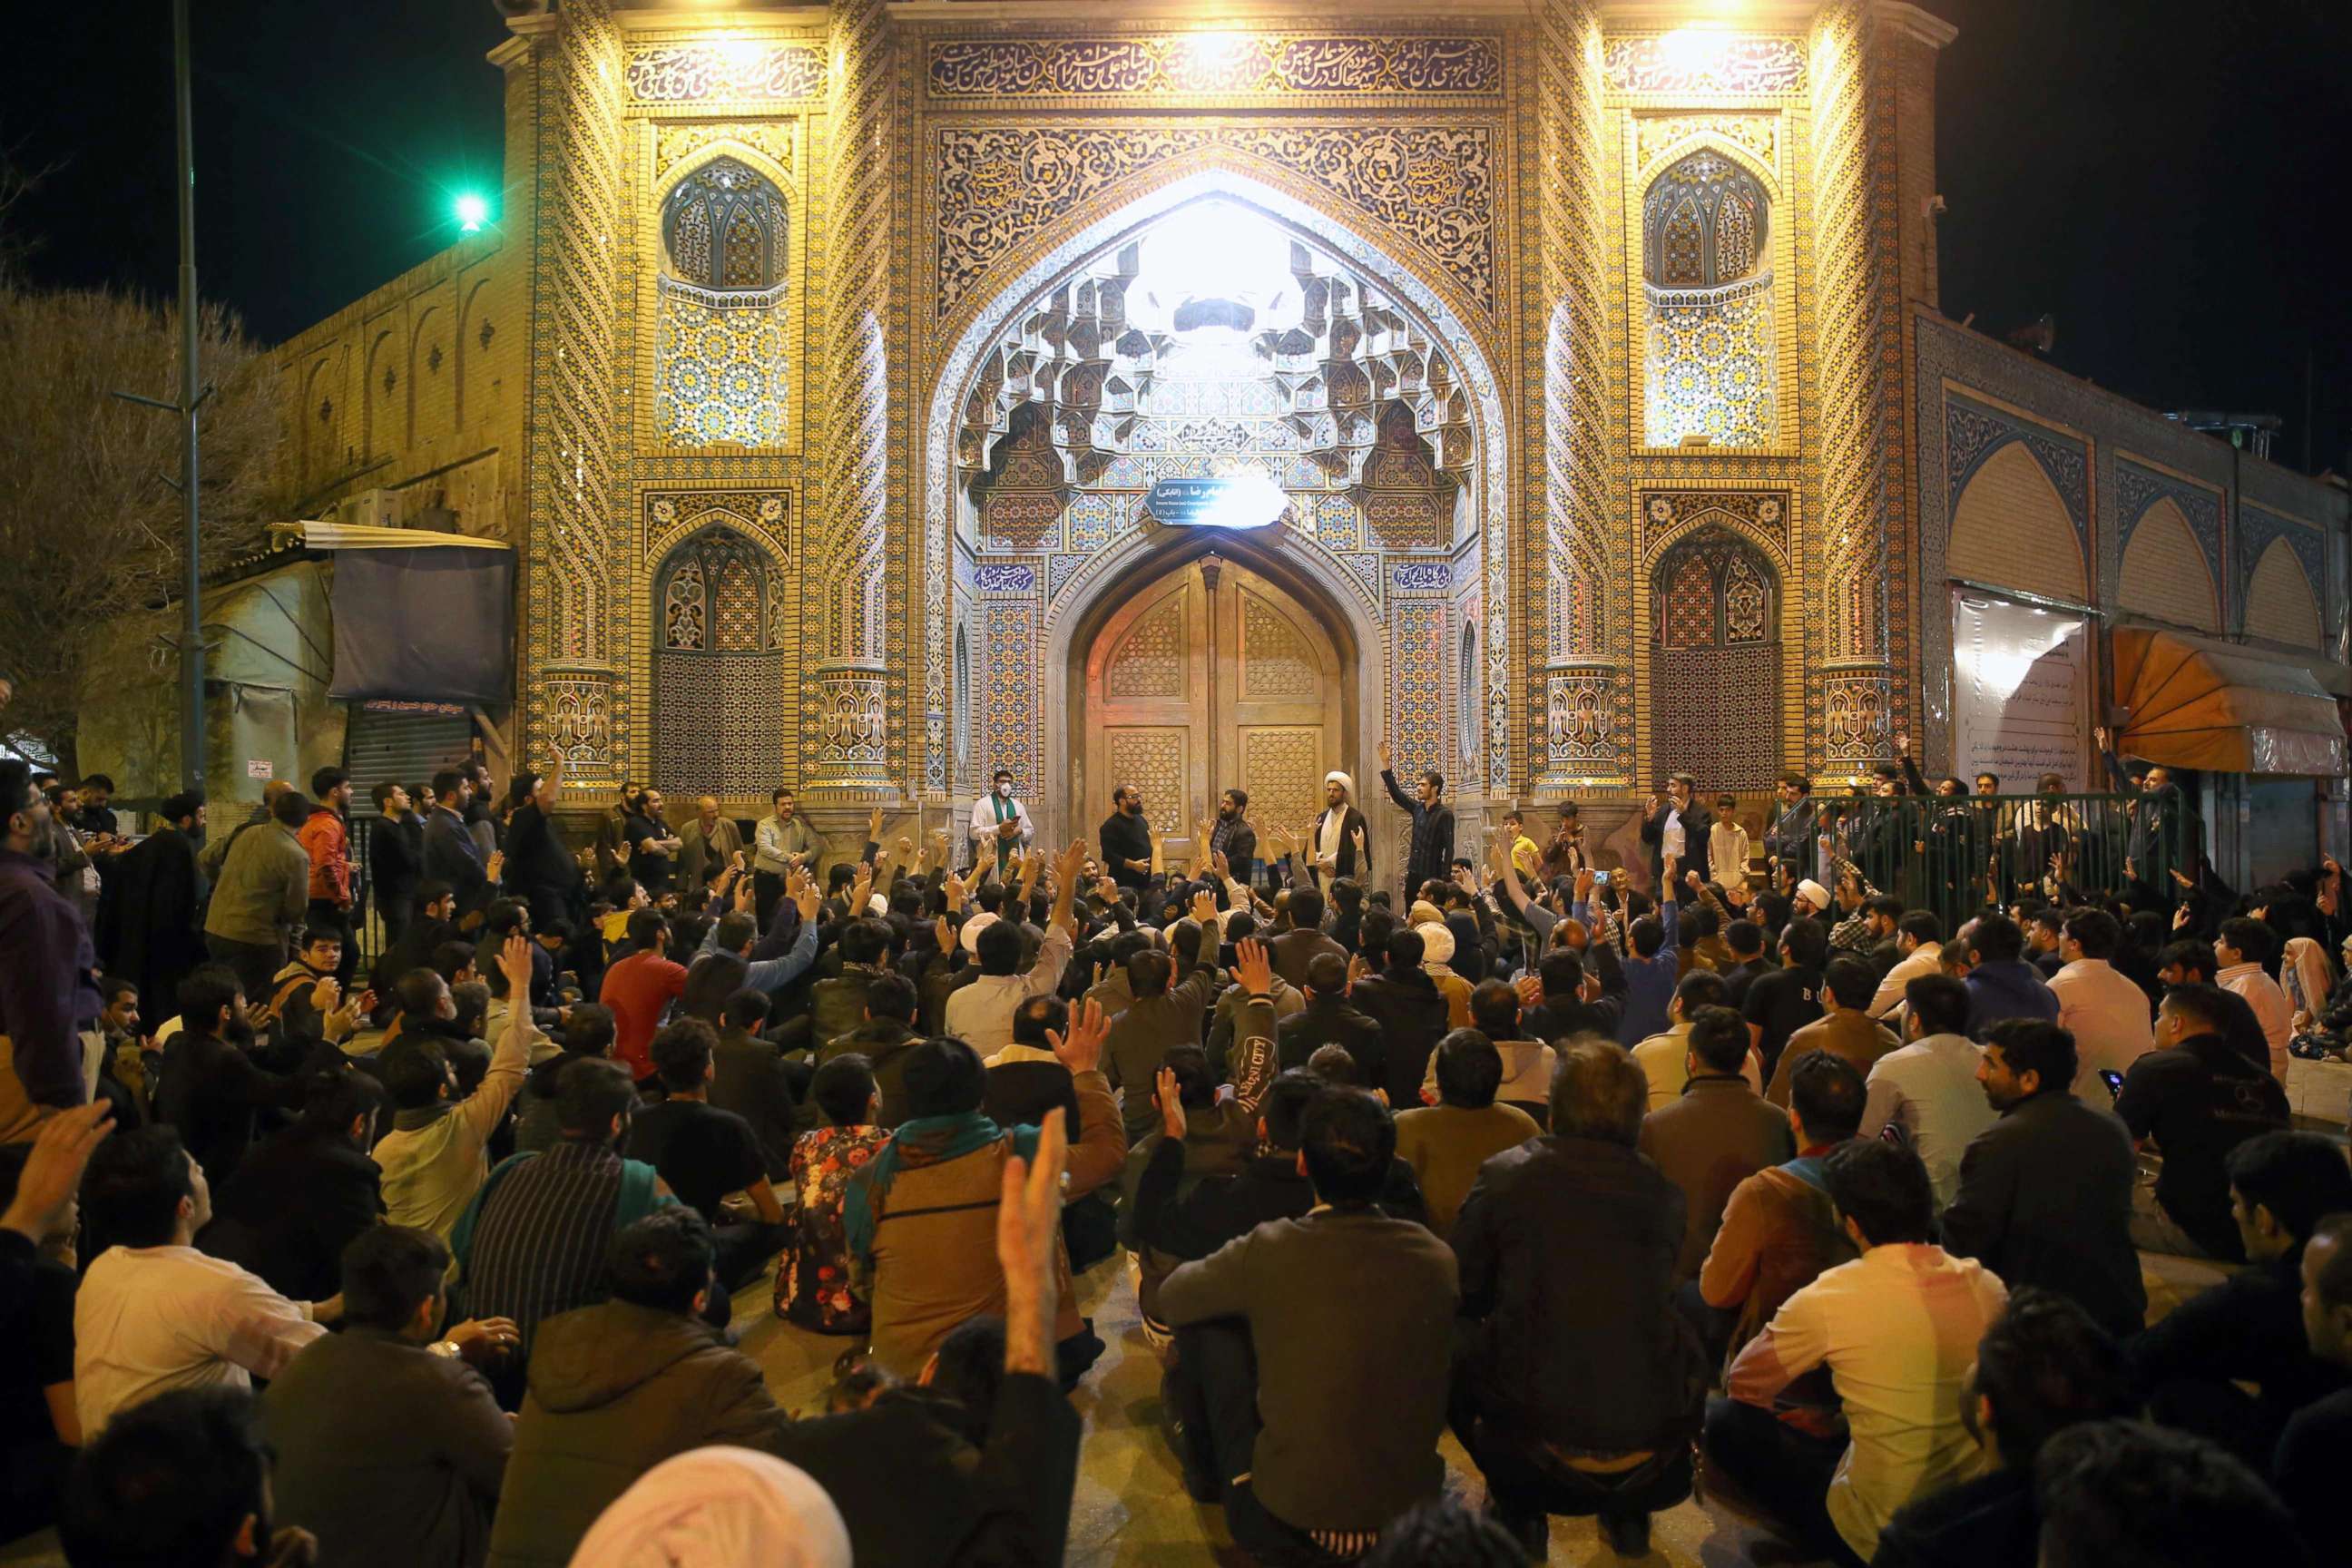 PHOTO: People gather outside the closed doors of the Fatima Masumeh shrine in Iran's holy city of Qom,Iran, March 16 2020. 